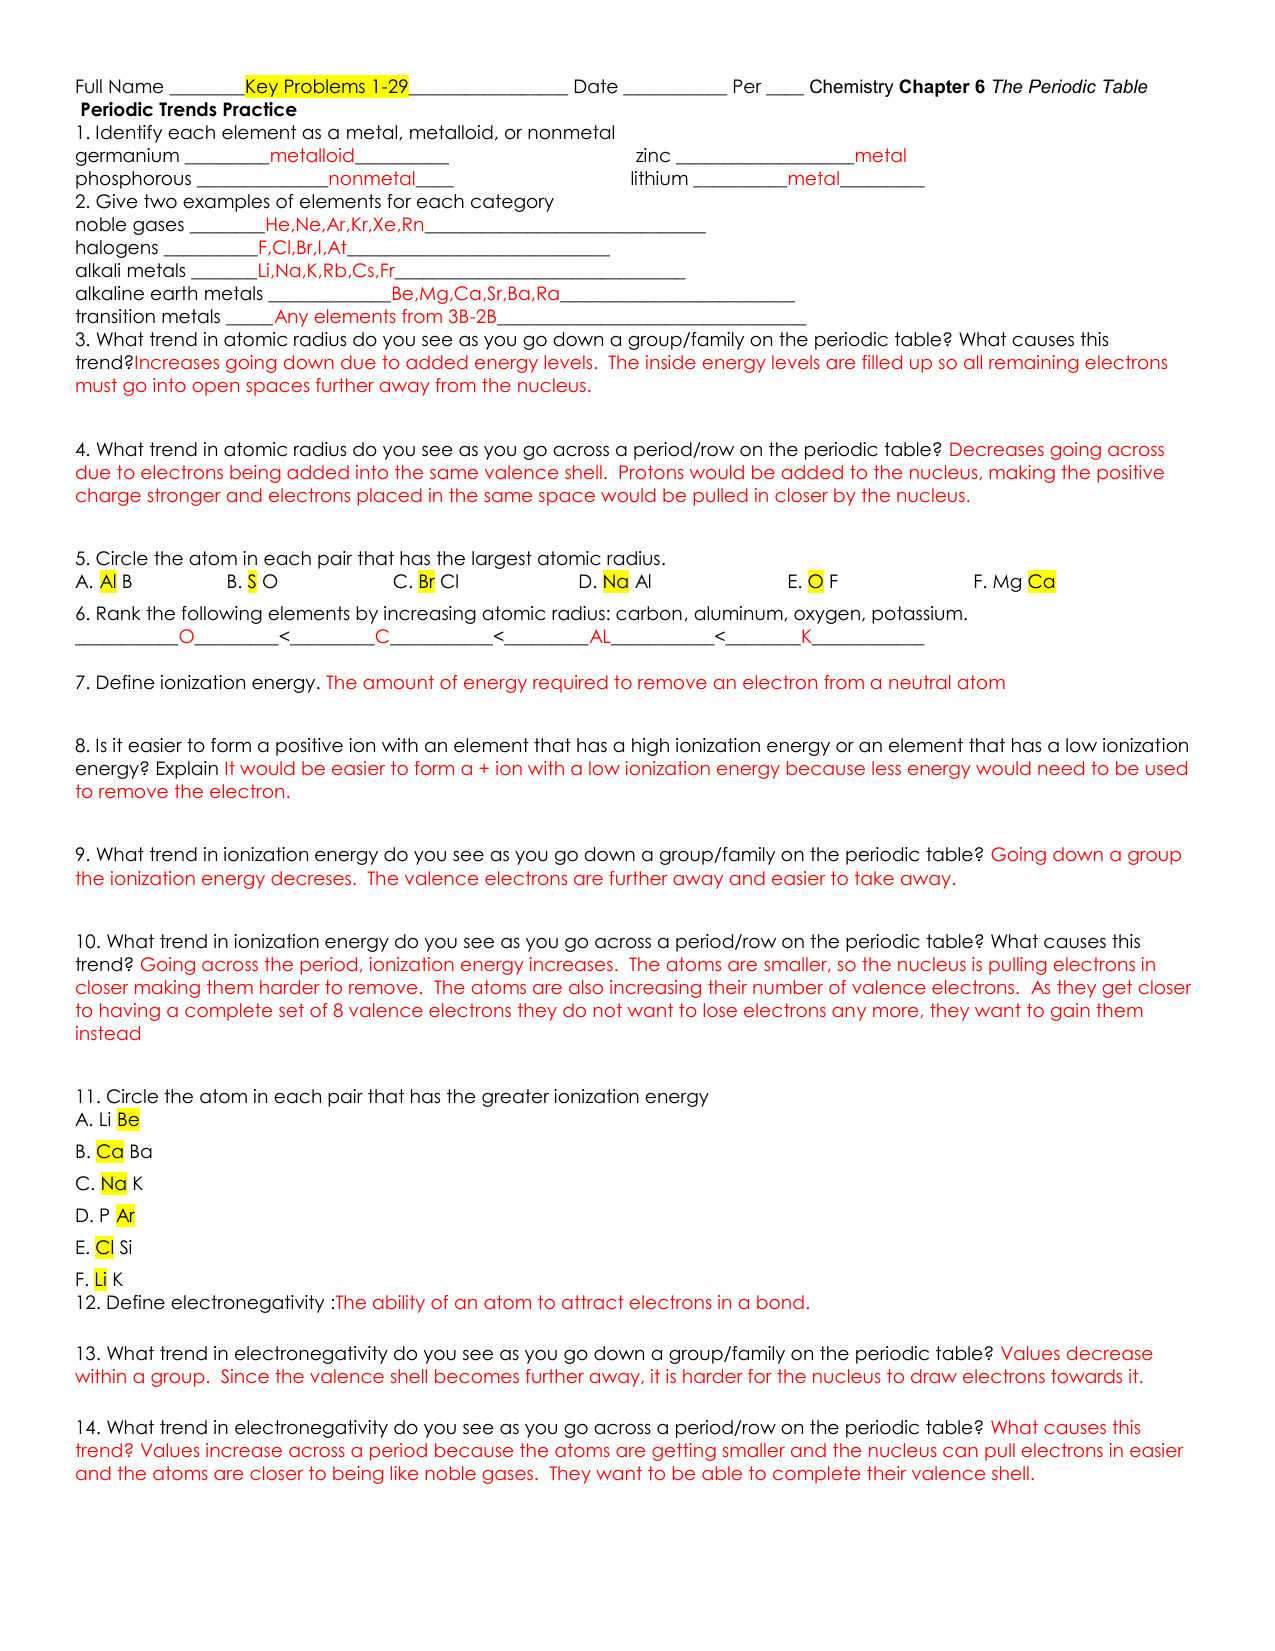 Build An atom Simulation Worksheet Answers together with Worksheet Electrons In atoms Answer Key Gallery Worksheet for Kids